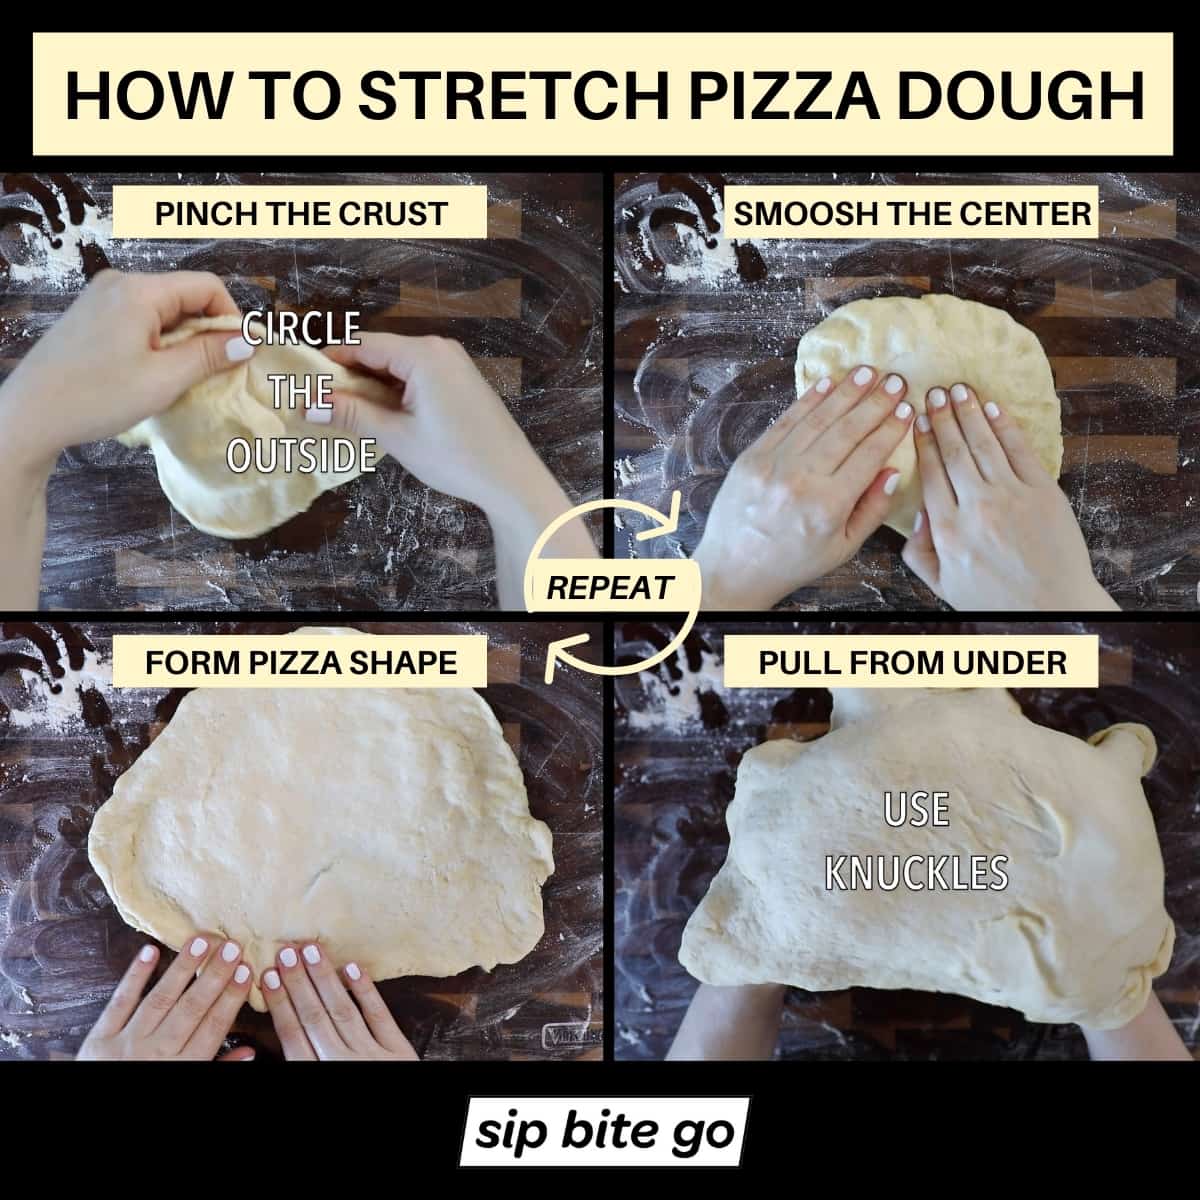 Demonstrating stretching pizza dough for for parbaking without toppings in a chart with images.